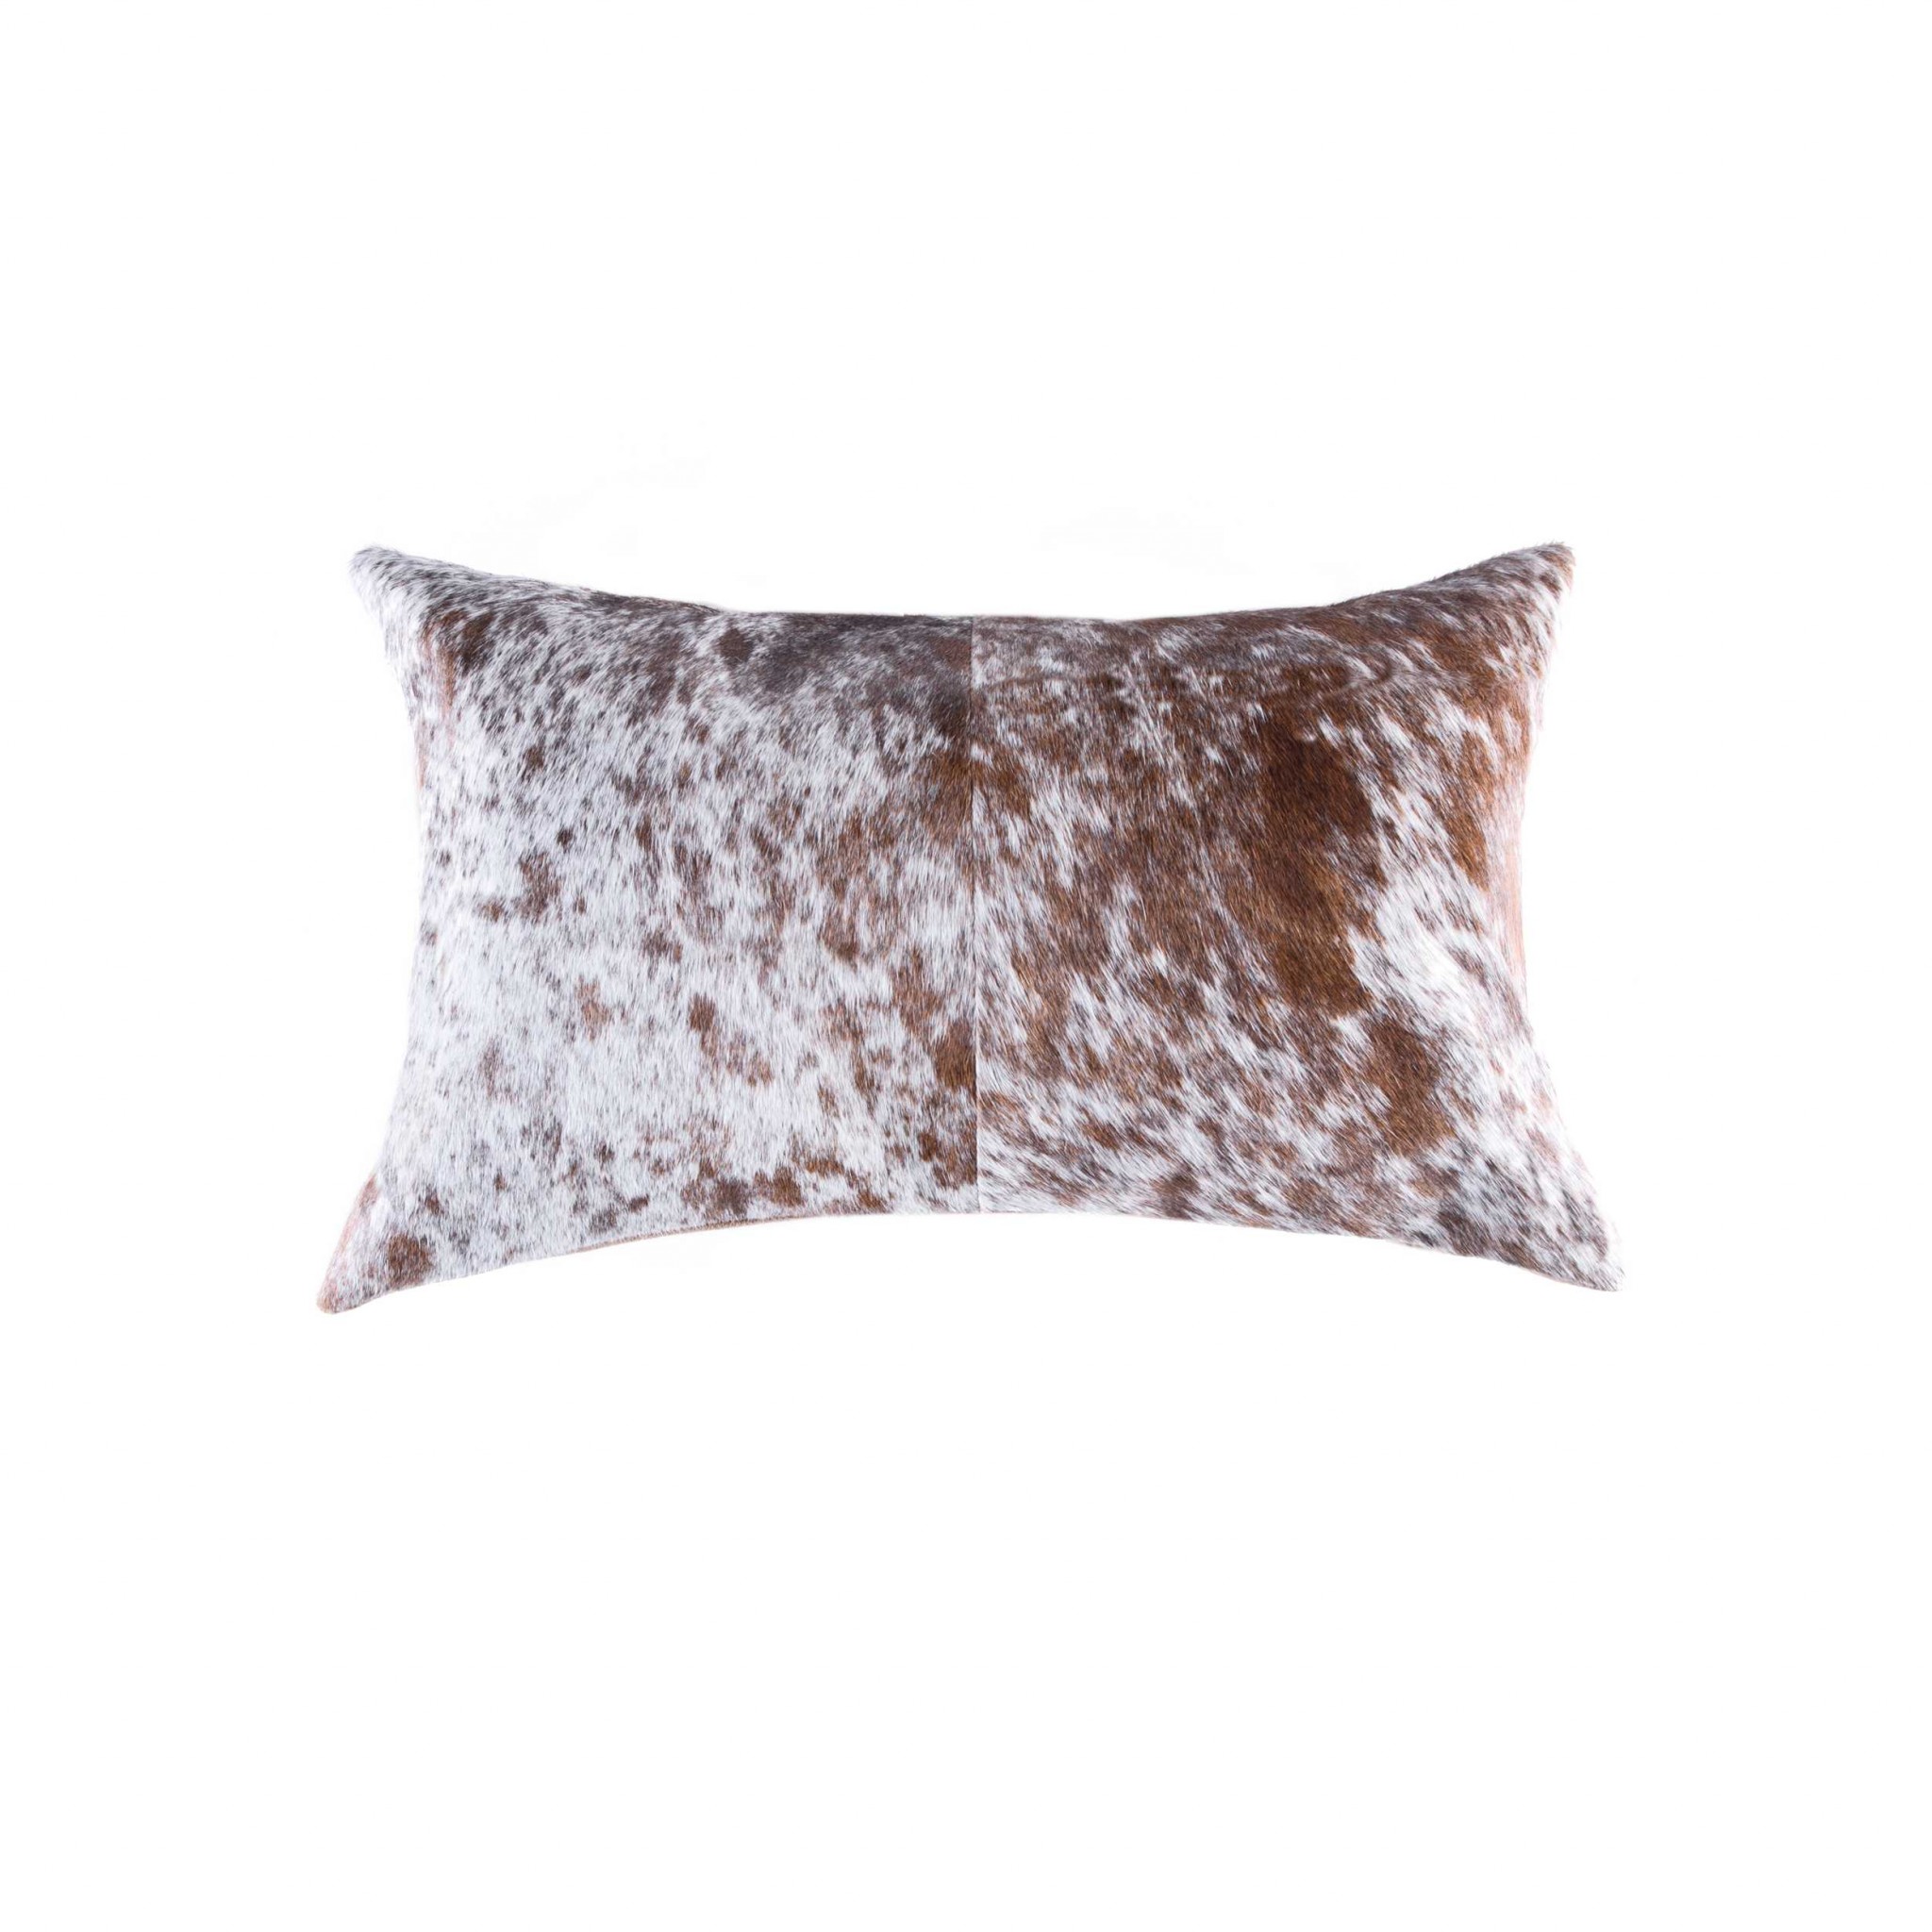 18" x 18" x 5" Salt And Pepper Brown And White Cowhide - Pillow